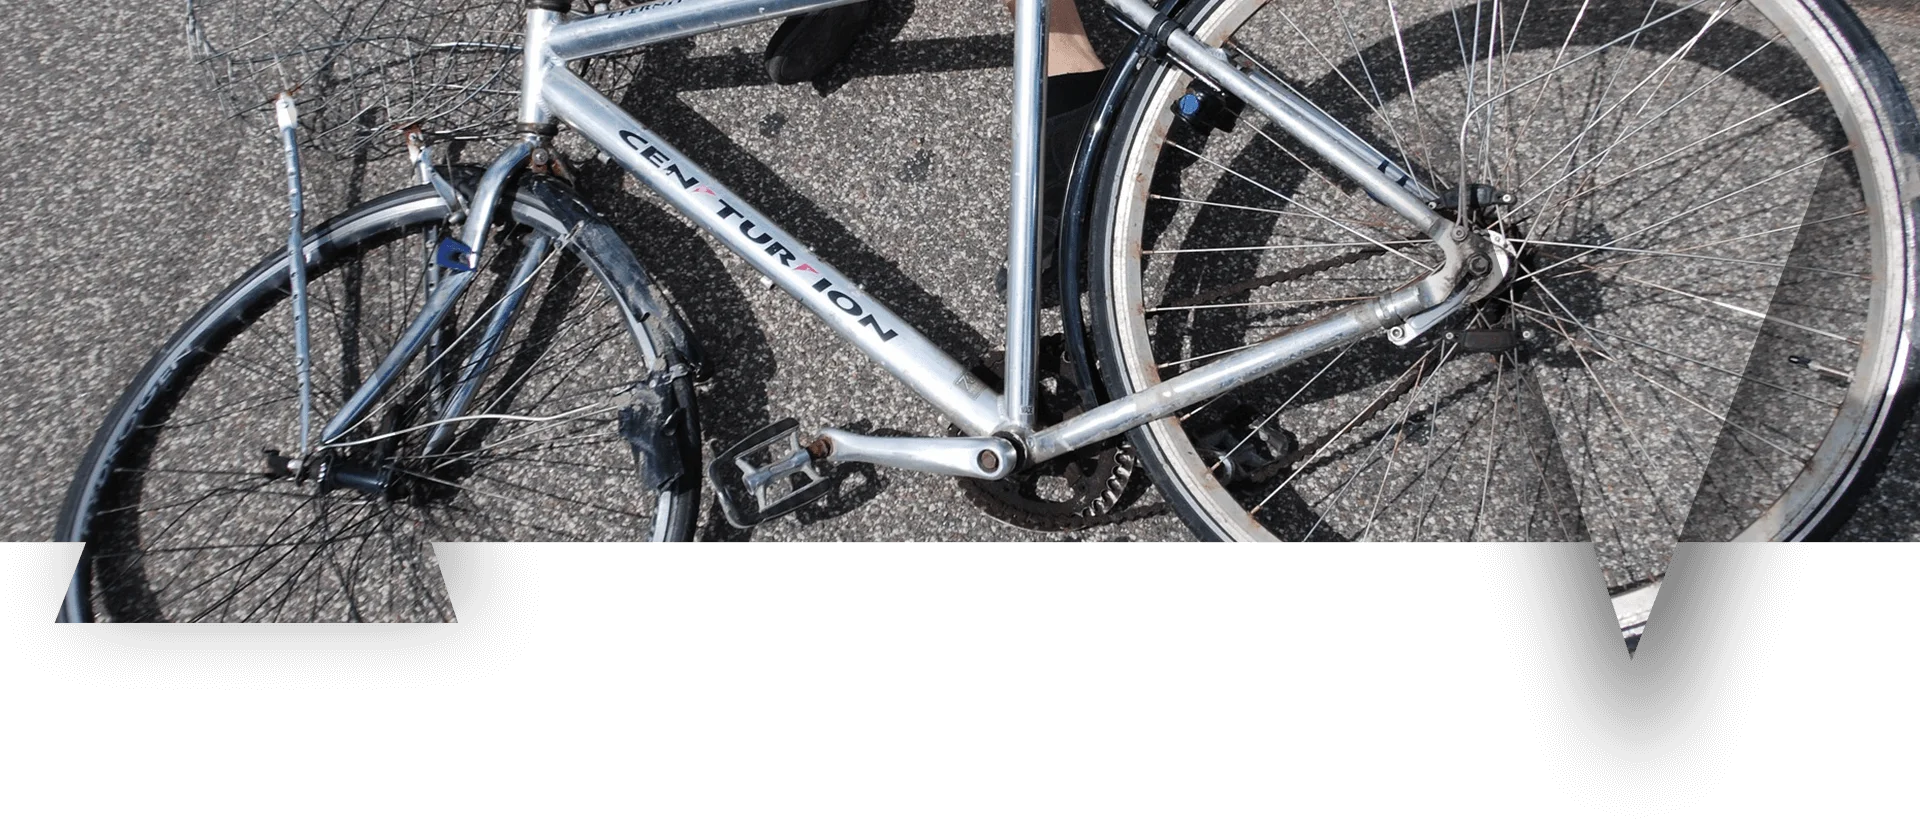 Bicycle accident law firm denver